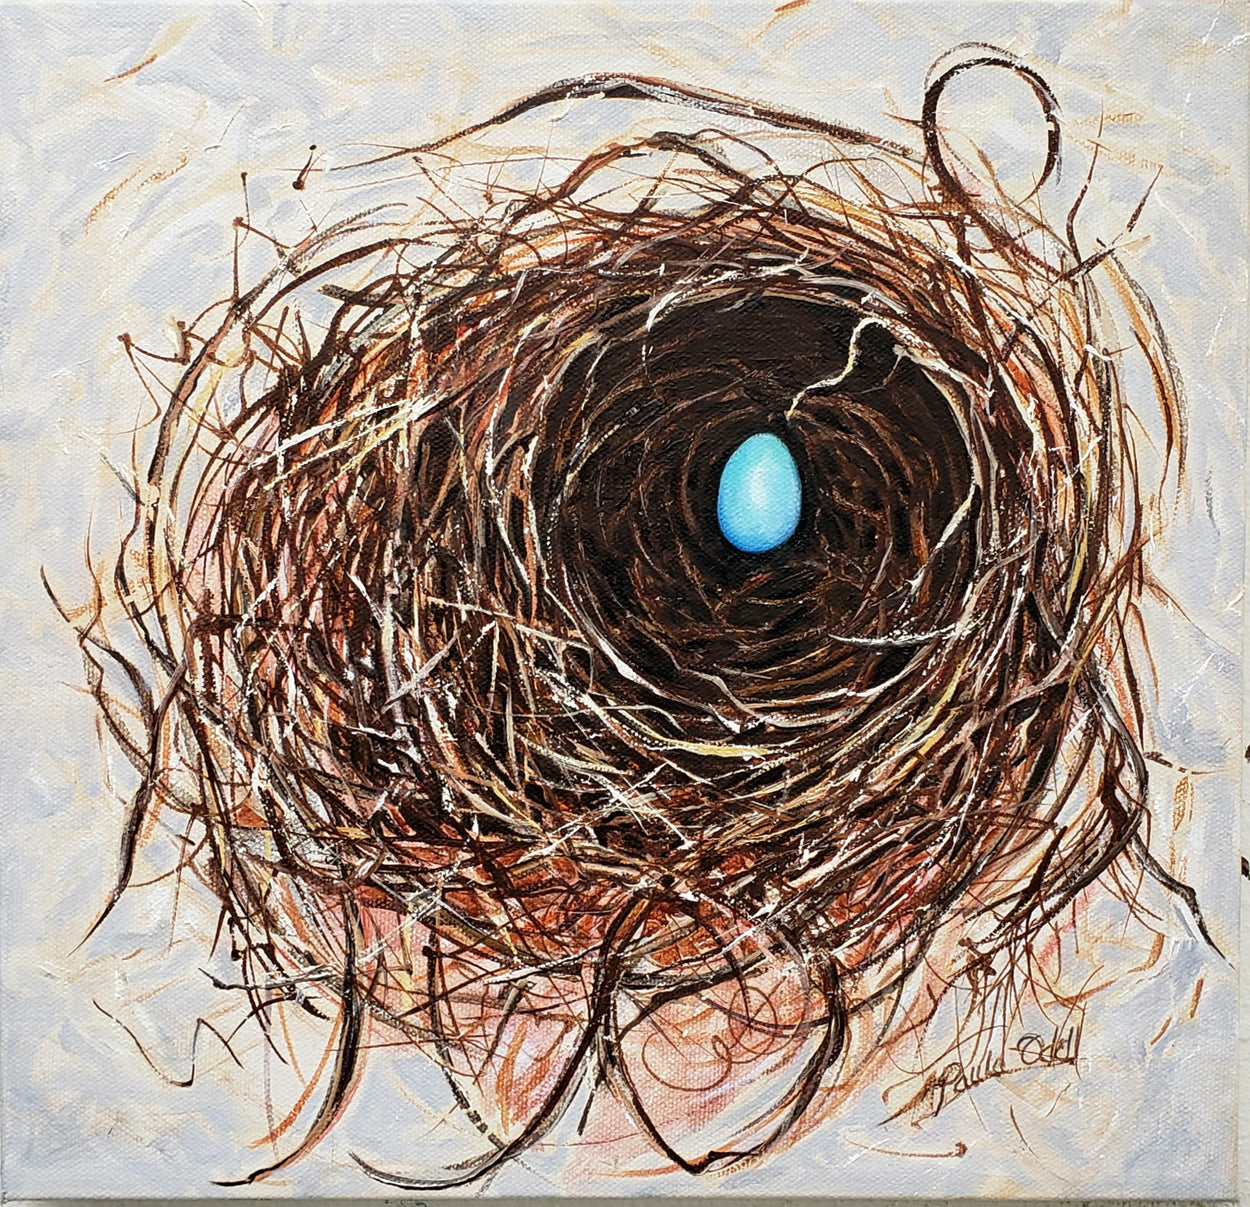 Original oil painting of bird's nest with a sweet aqua egg tucked in cozy and safe. 12x12 oil on canvas